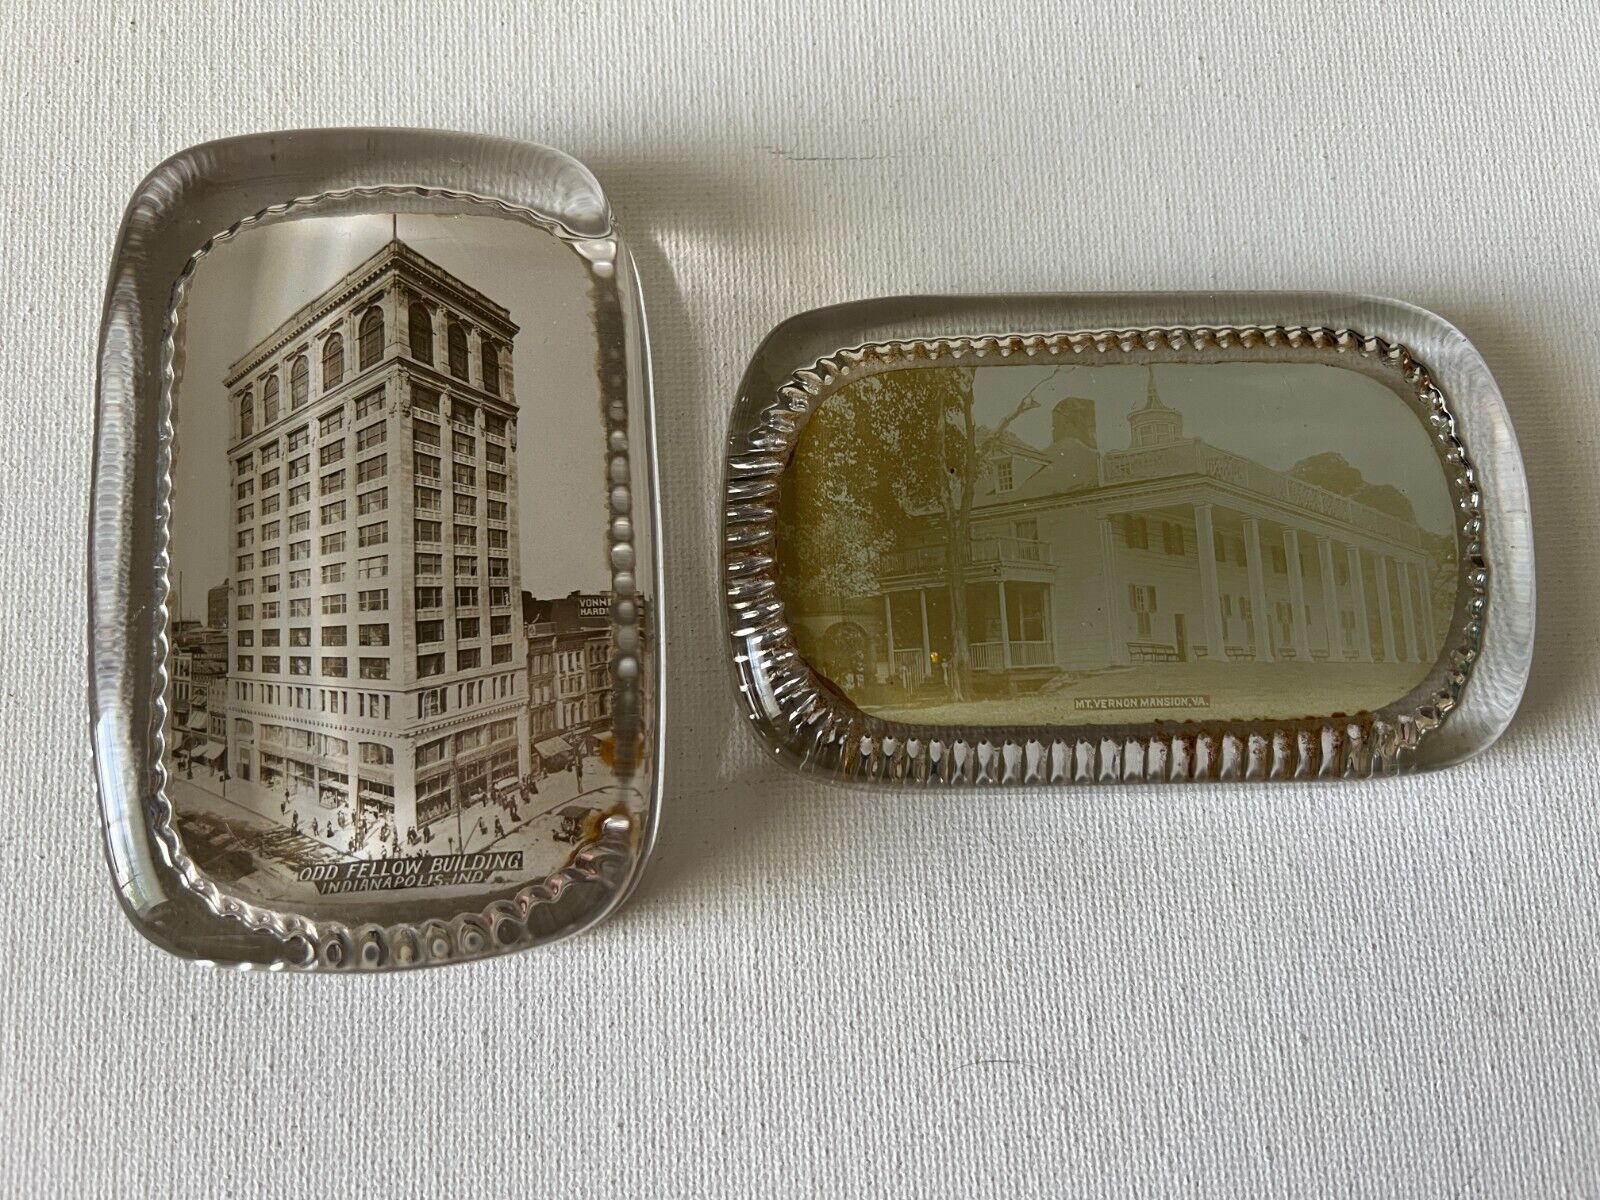 RARE ANTIQUE ODDFELLOW BUILDING INDIANAPOLIS & MT. VERNON GLASS PAPERWEIGHTS